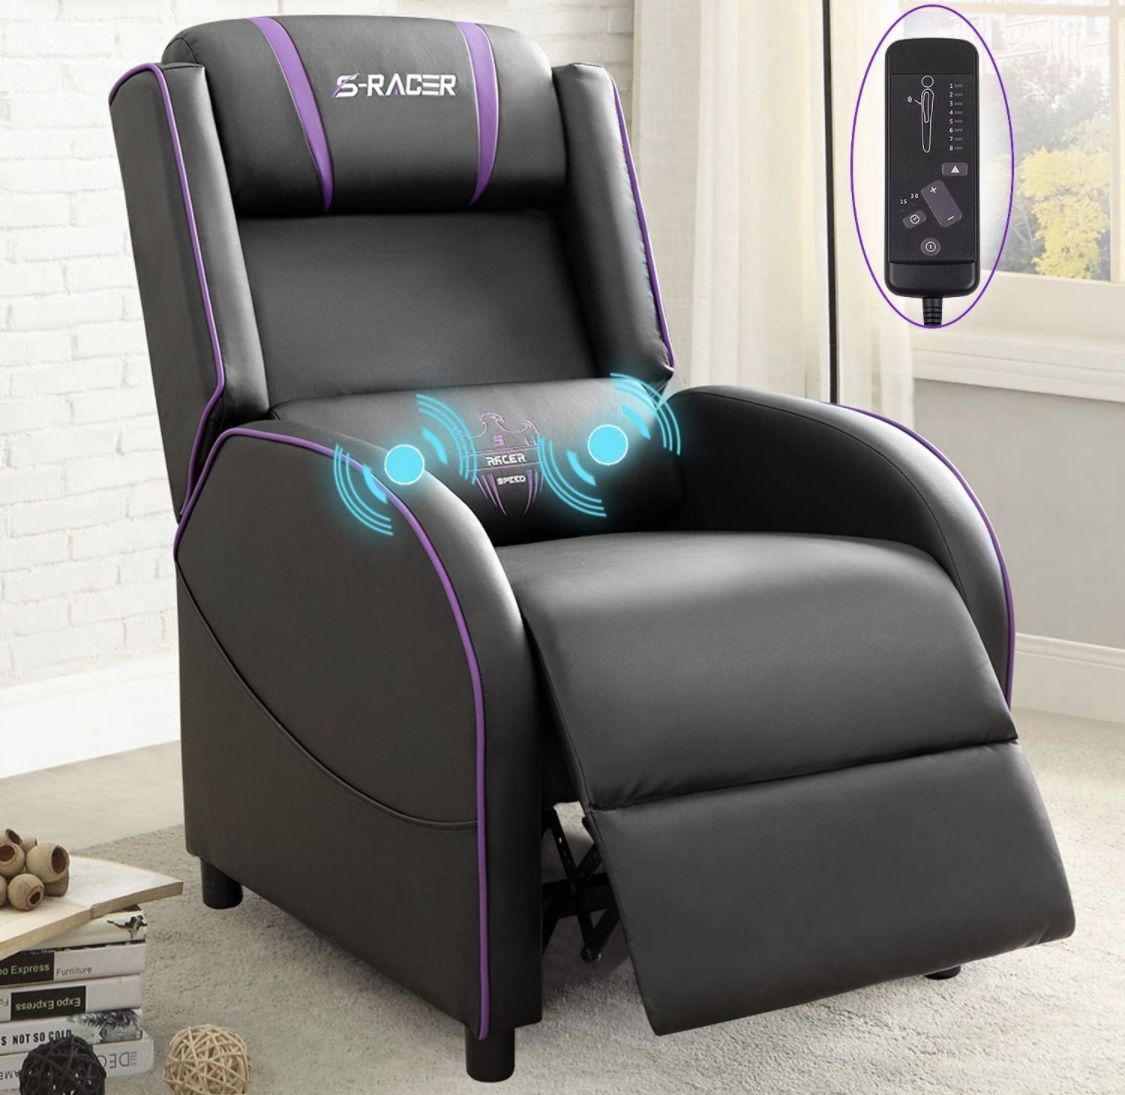 Homall Gaming Recliner Chair Racing Style Single Living Room Sofa Recliner PU Leather Recliner Seat Home Theater Seating